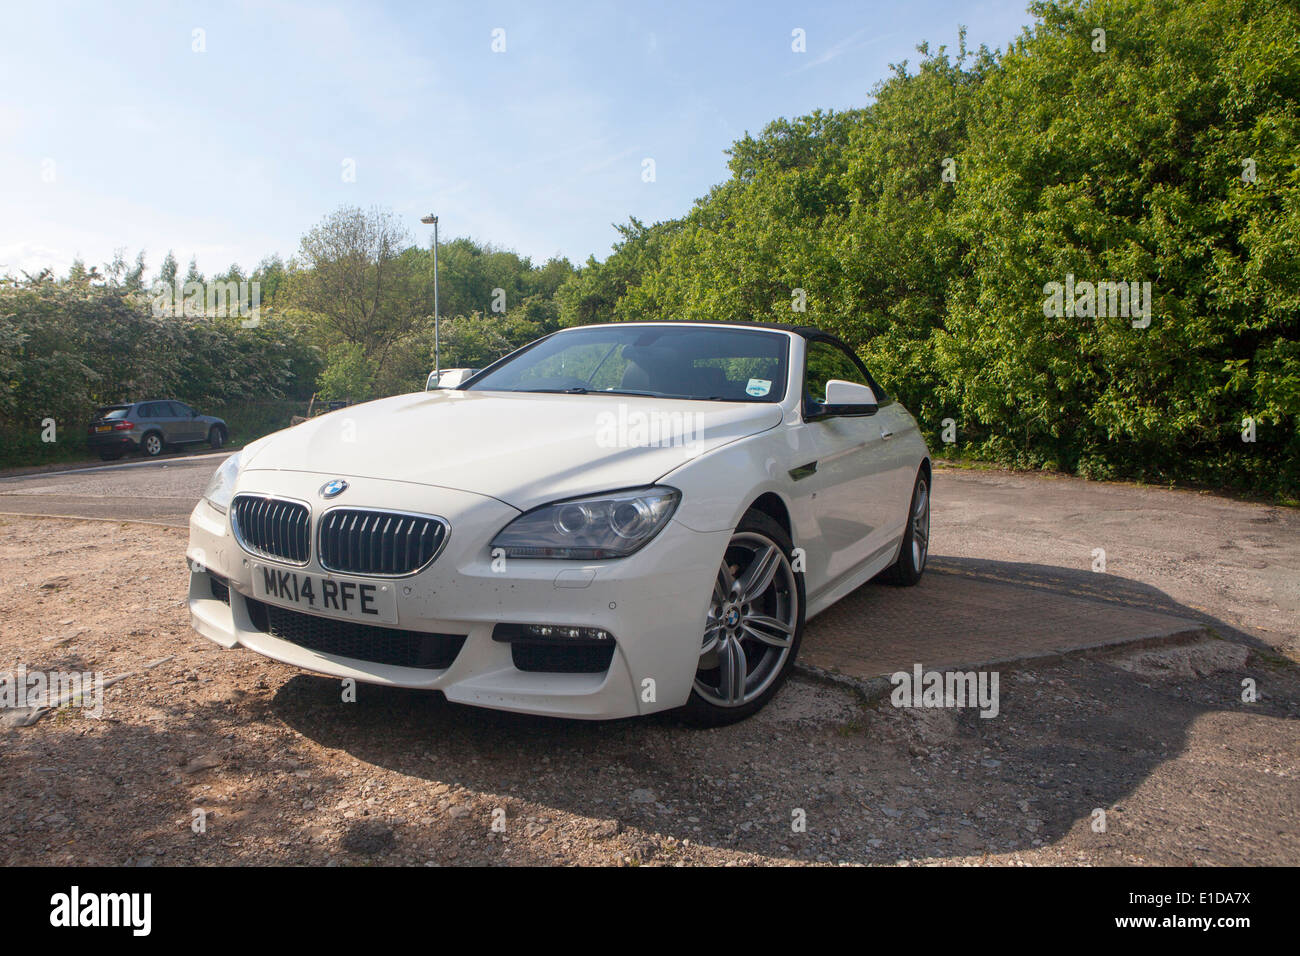 White BMW 6 Series M Sport Convertible 2 door 640d parked Stock Photo